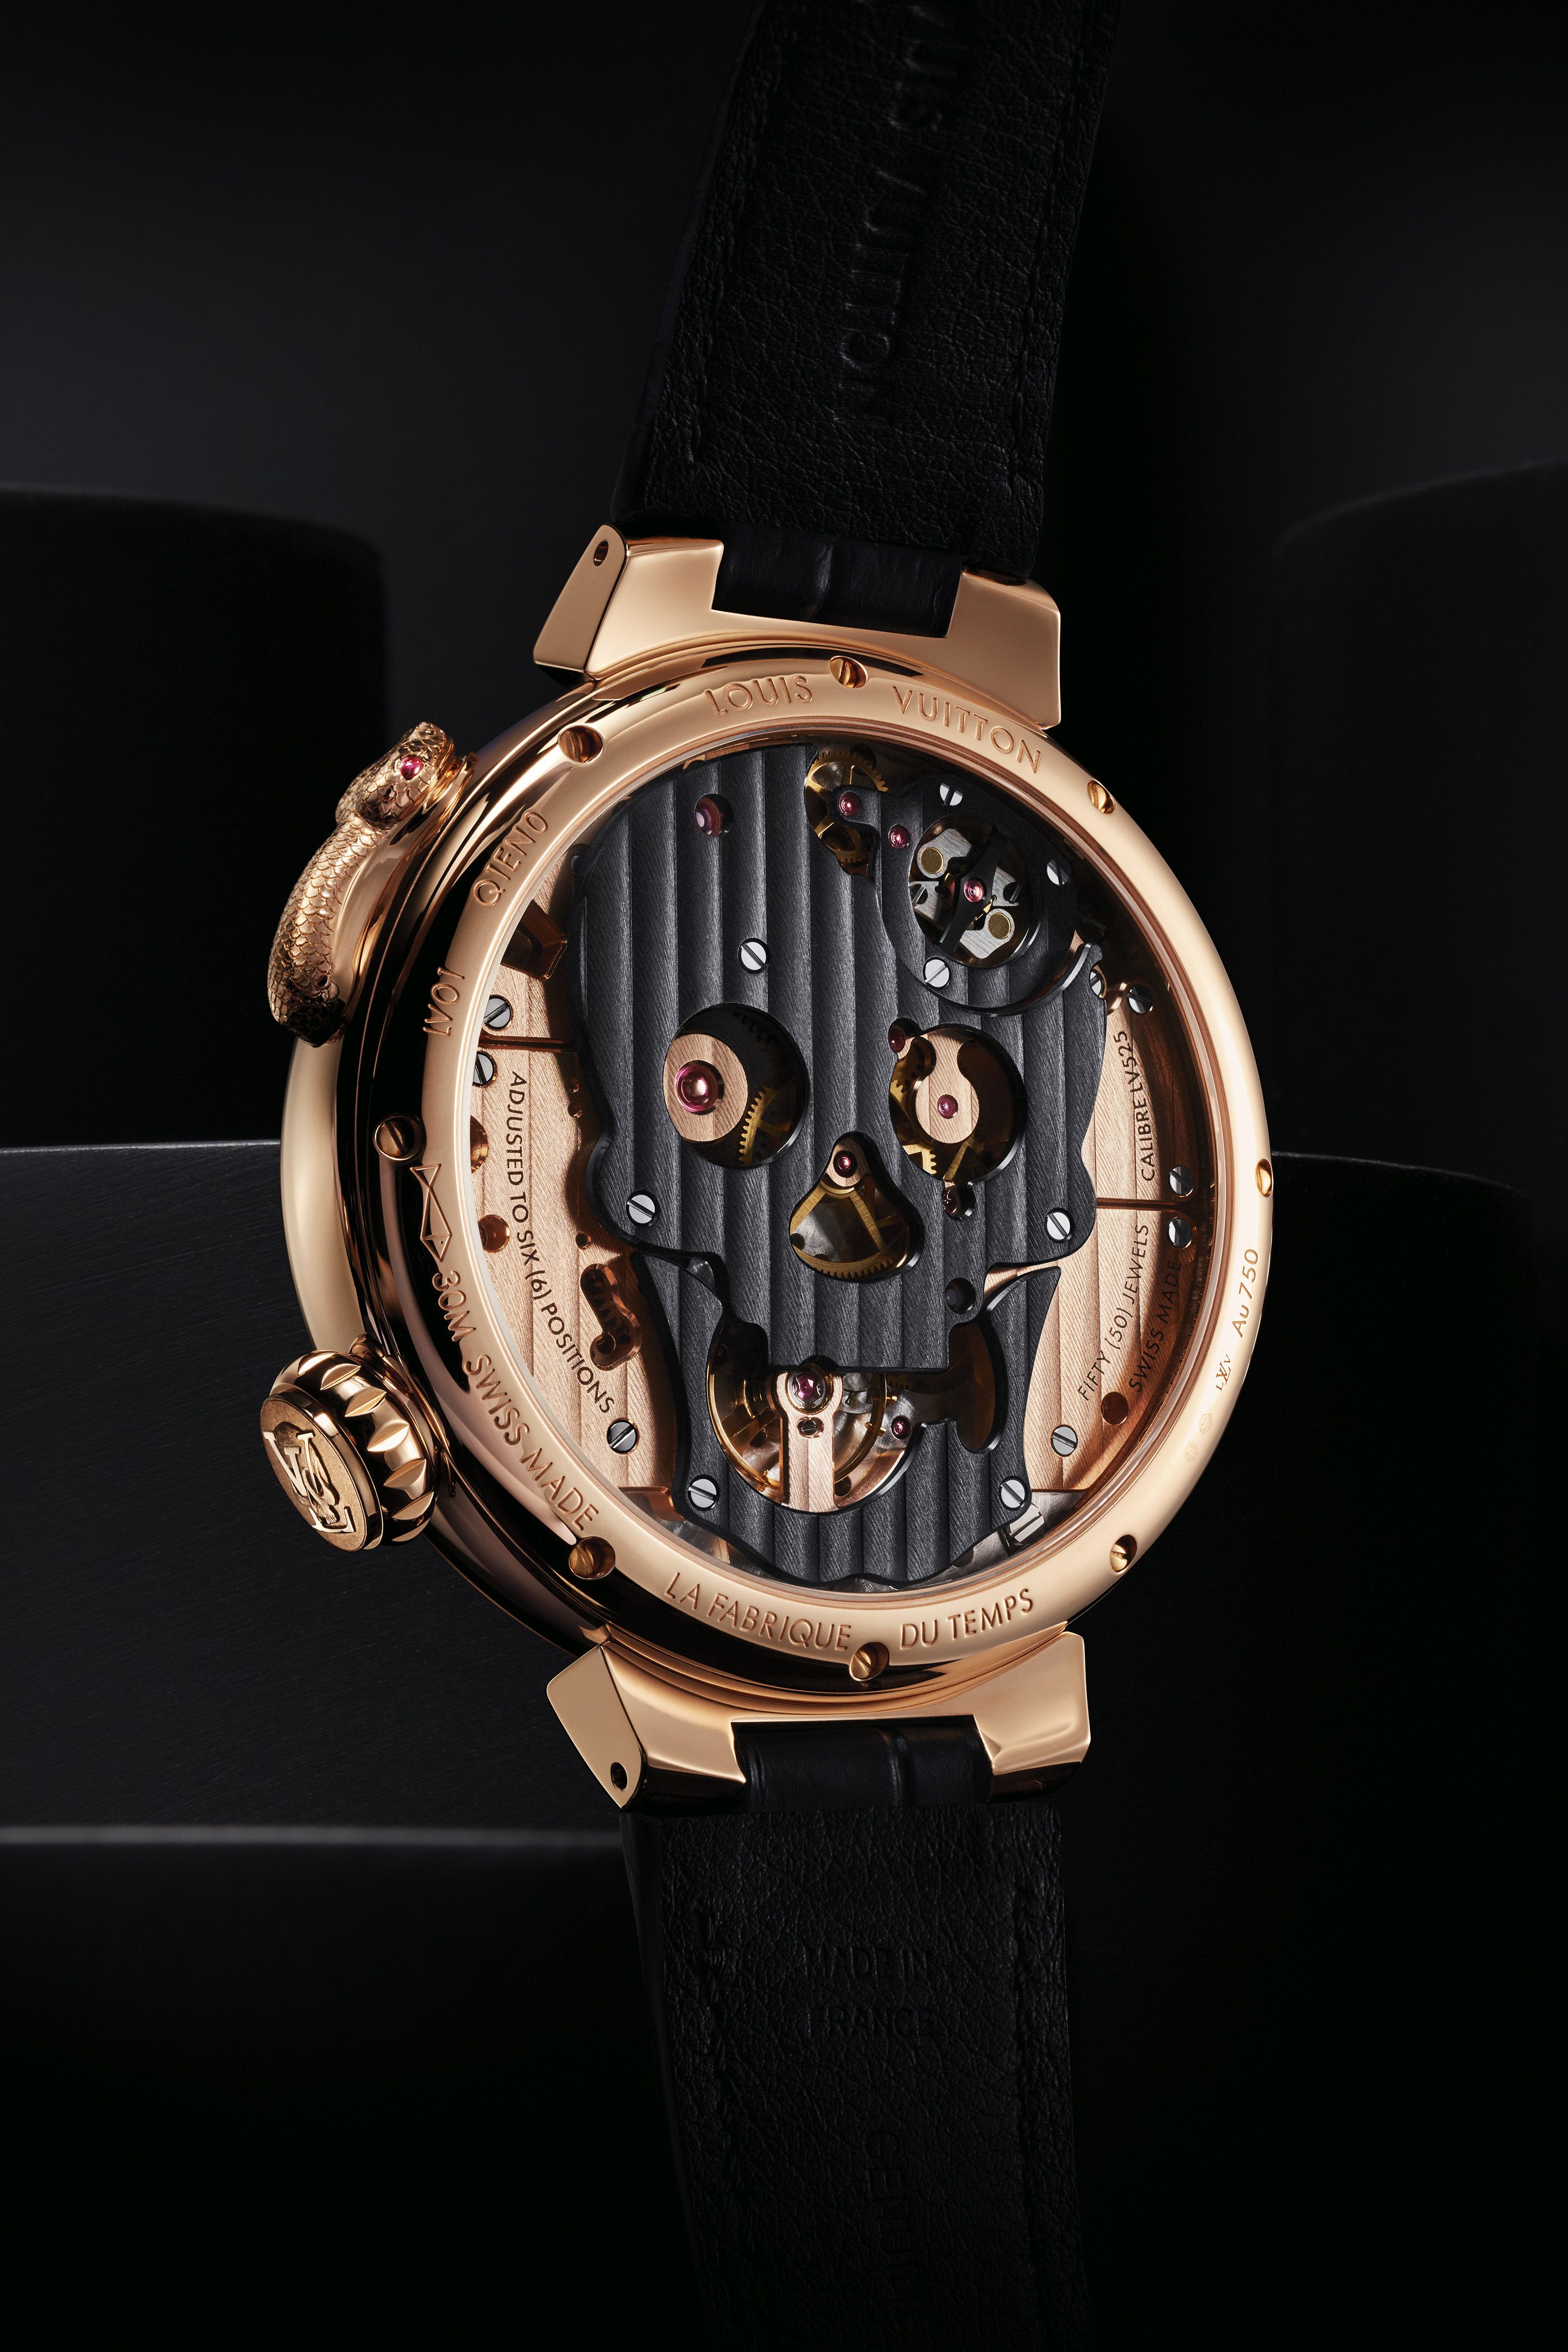 LVMH Group Luxury Watch Brands Leave Baselworld: Century Old Trade